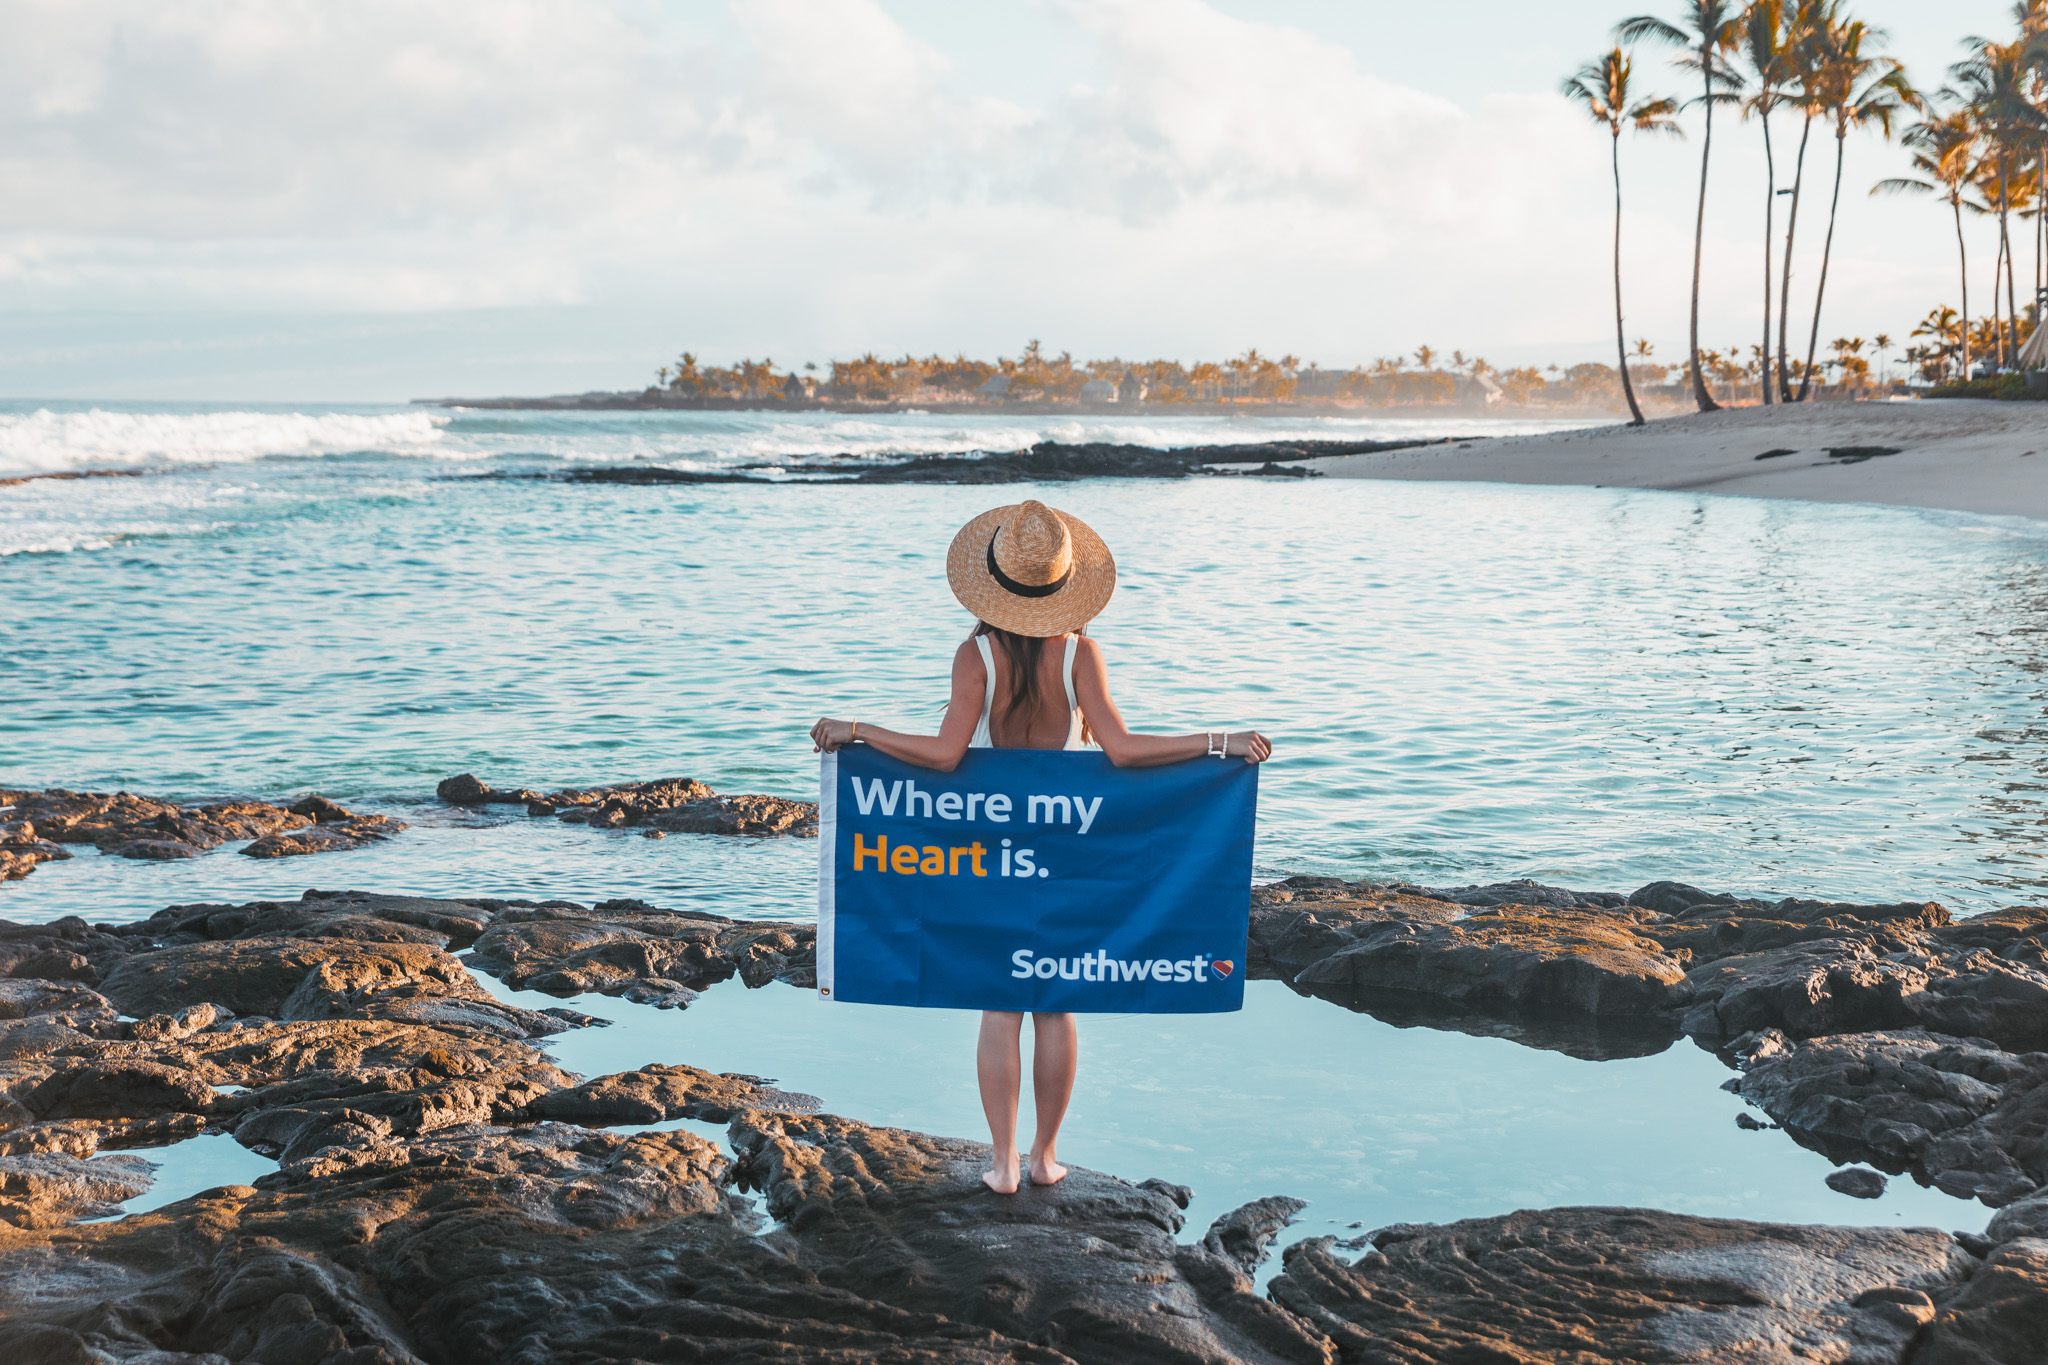 Southwest Airlines flag at the beach // 10 Things You Have to Do on the Big Island of Hawaii // www.readysetjetset.net #readysetjetset #hawaii #bigisland #blogpost #hawaiiguide